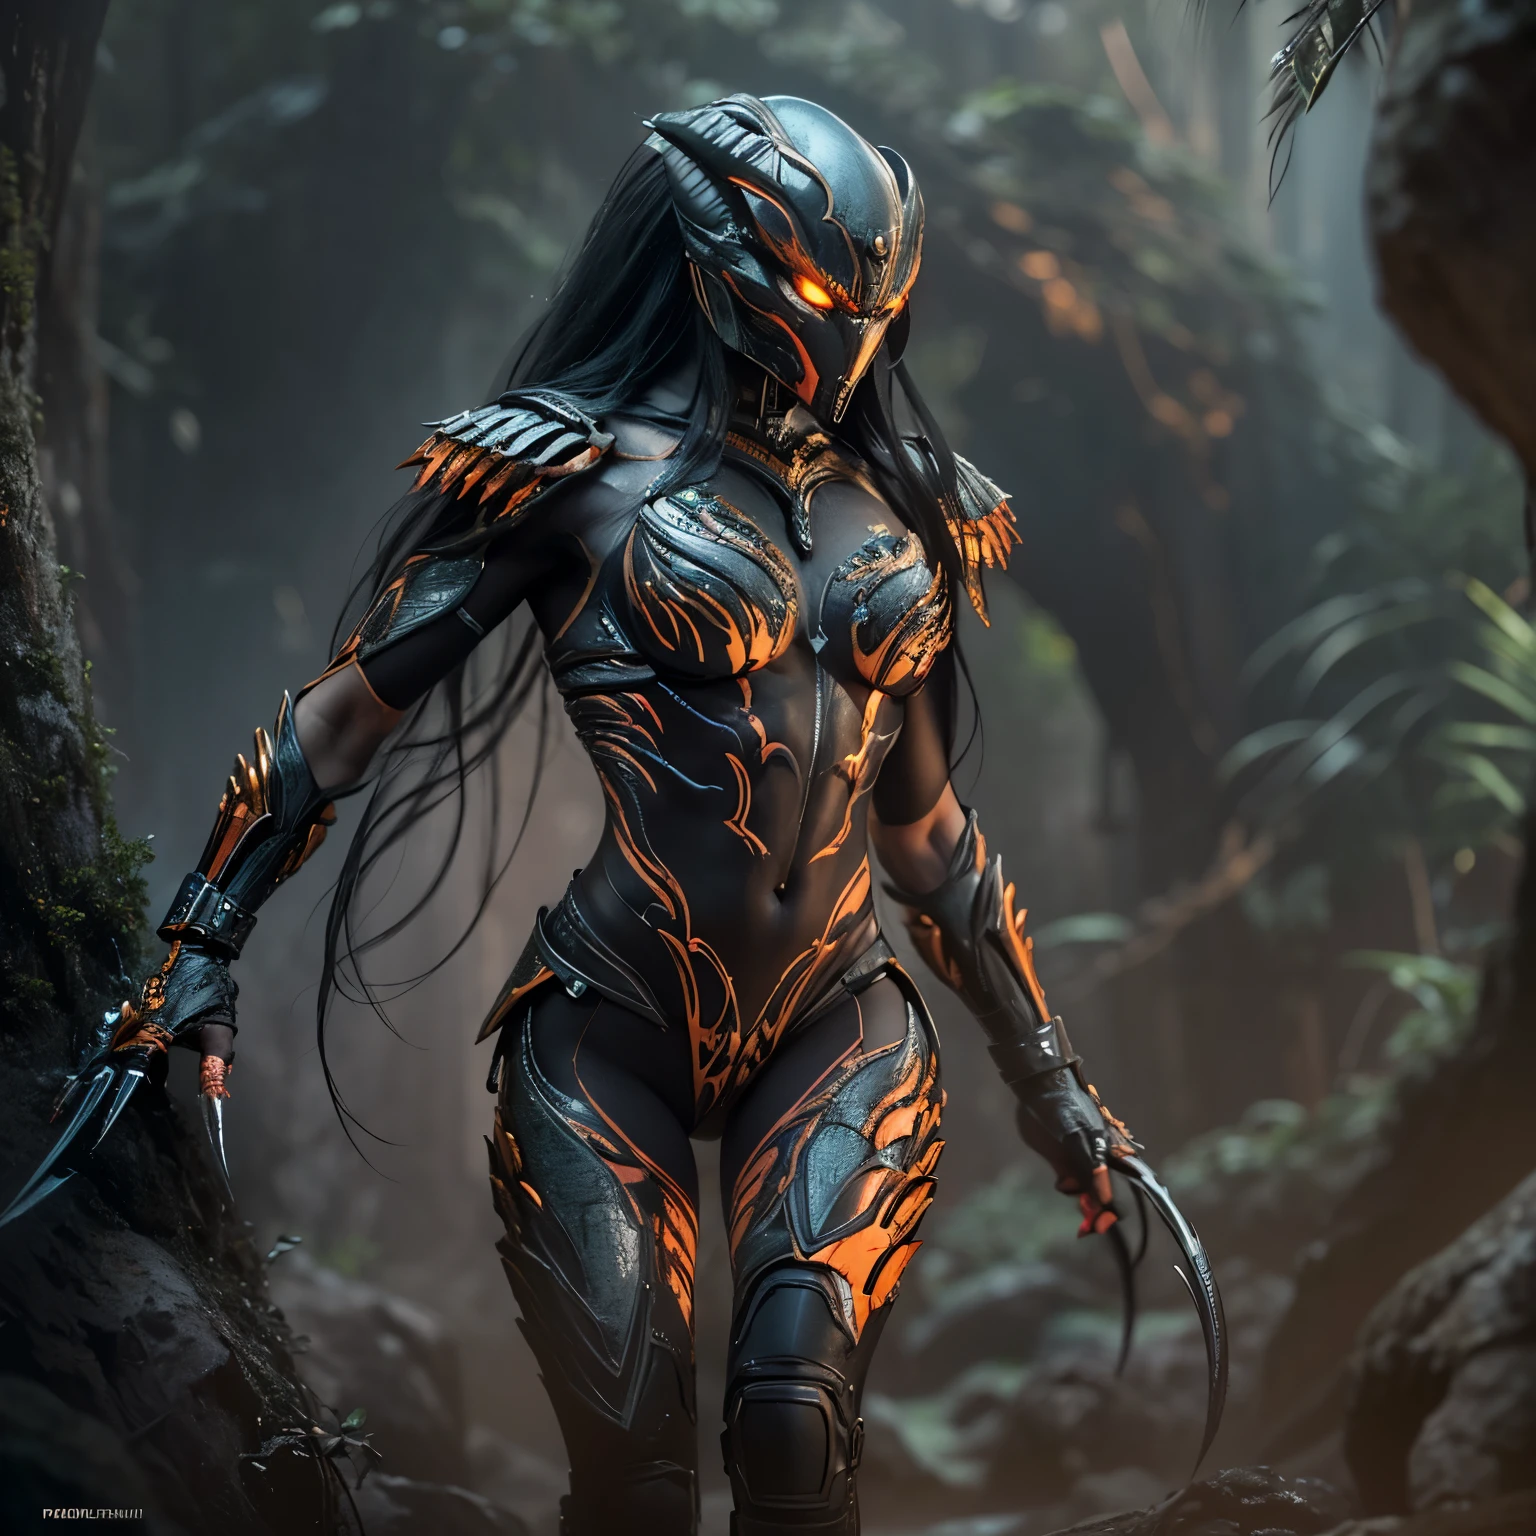 1 female alien, The predator, (extremely beautiful:1.2), (intense gaze:1.4), (predator:1.1), long dark claws, (NSFW:0.8), nipples, thick eyebrows, (She has shining orange eyes:1.2), the most beautiful face in the universe,  jet black hair, symmetrical beautiful eyes, hyper detailed eyes,

A woman predator with an extremely beautiful face, her intense gaze fixed on her prey, a primal force that could not be denied.

(beautiful lean body:1.5), (muscular build:1.2), (prowling:1.3), (sleek movements:1.4)

Her beautiful body, muscular and toned, moved with sleek grace as she prowled, ready to strike at a moment's notice. The predator within her was always on,                                                                          
                                                                                                                                                               
 cinematic drawing of characters, ultra high quality model, cinematic quality, detail up, (Intricate details:1.2), High resolution, High Definition, drawing faithfully, Official art, Unity 8K wall , 8K Portrait, Best Quality, Very High resolution, ultra detailed artistic photography,